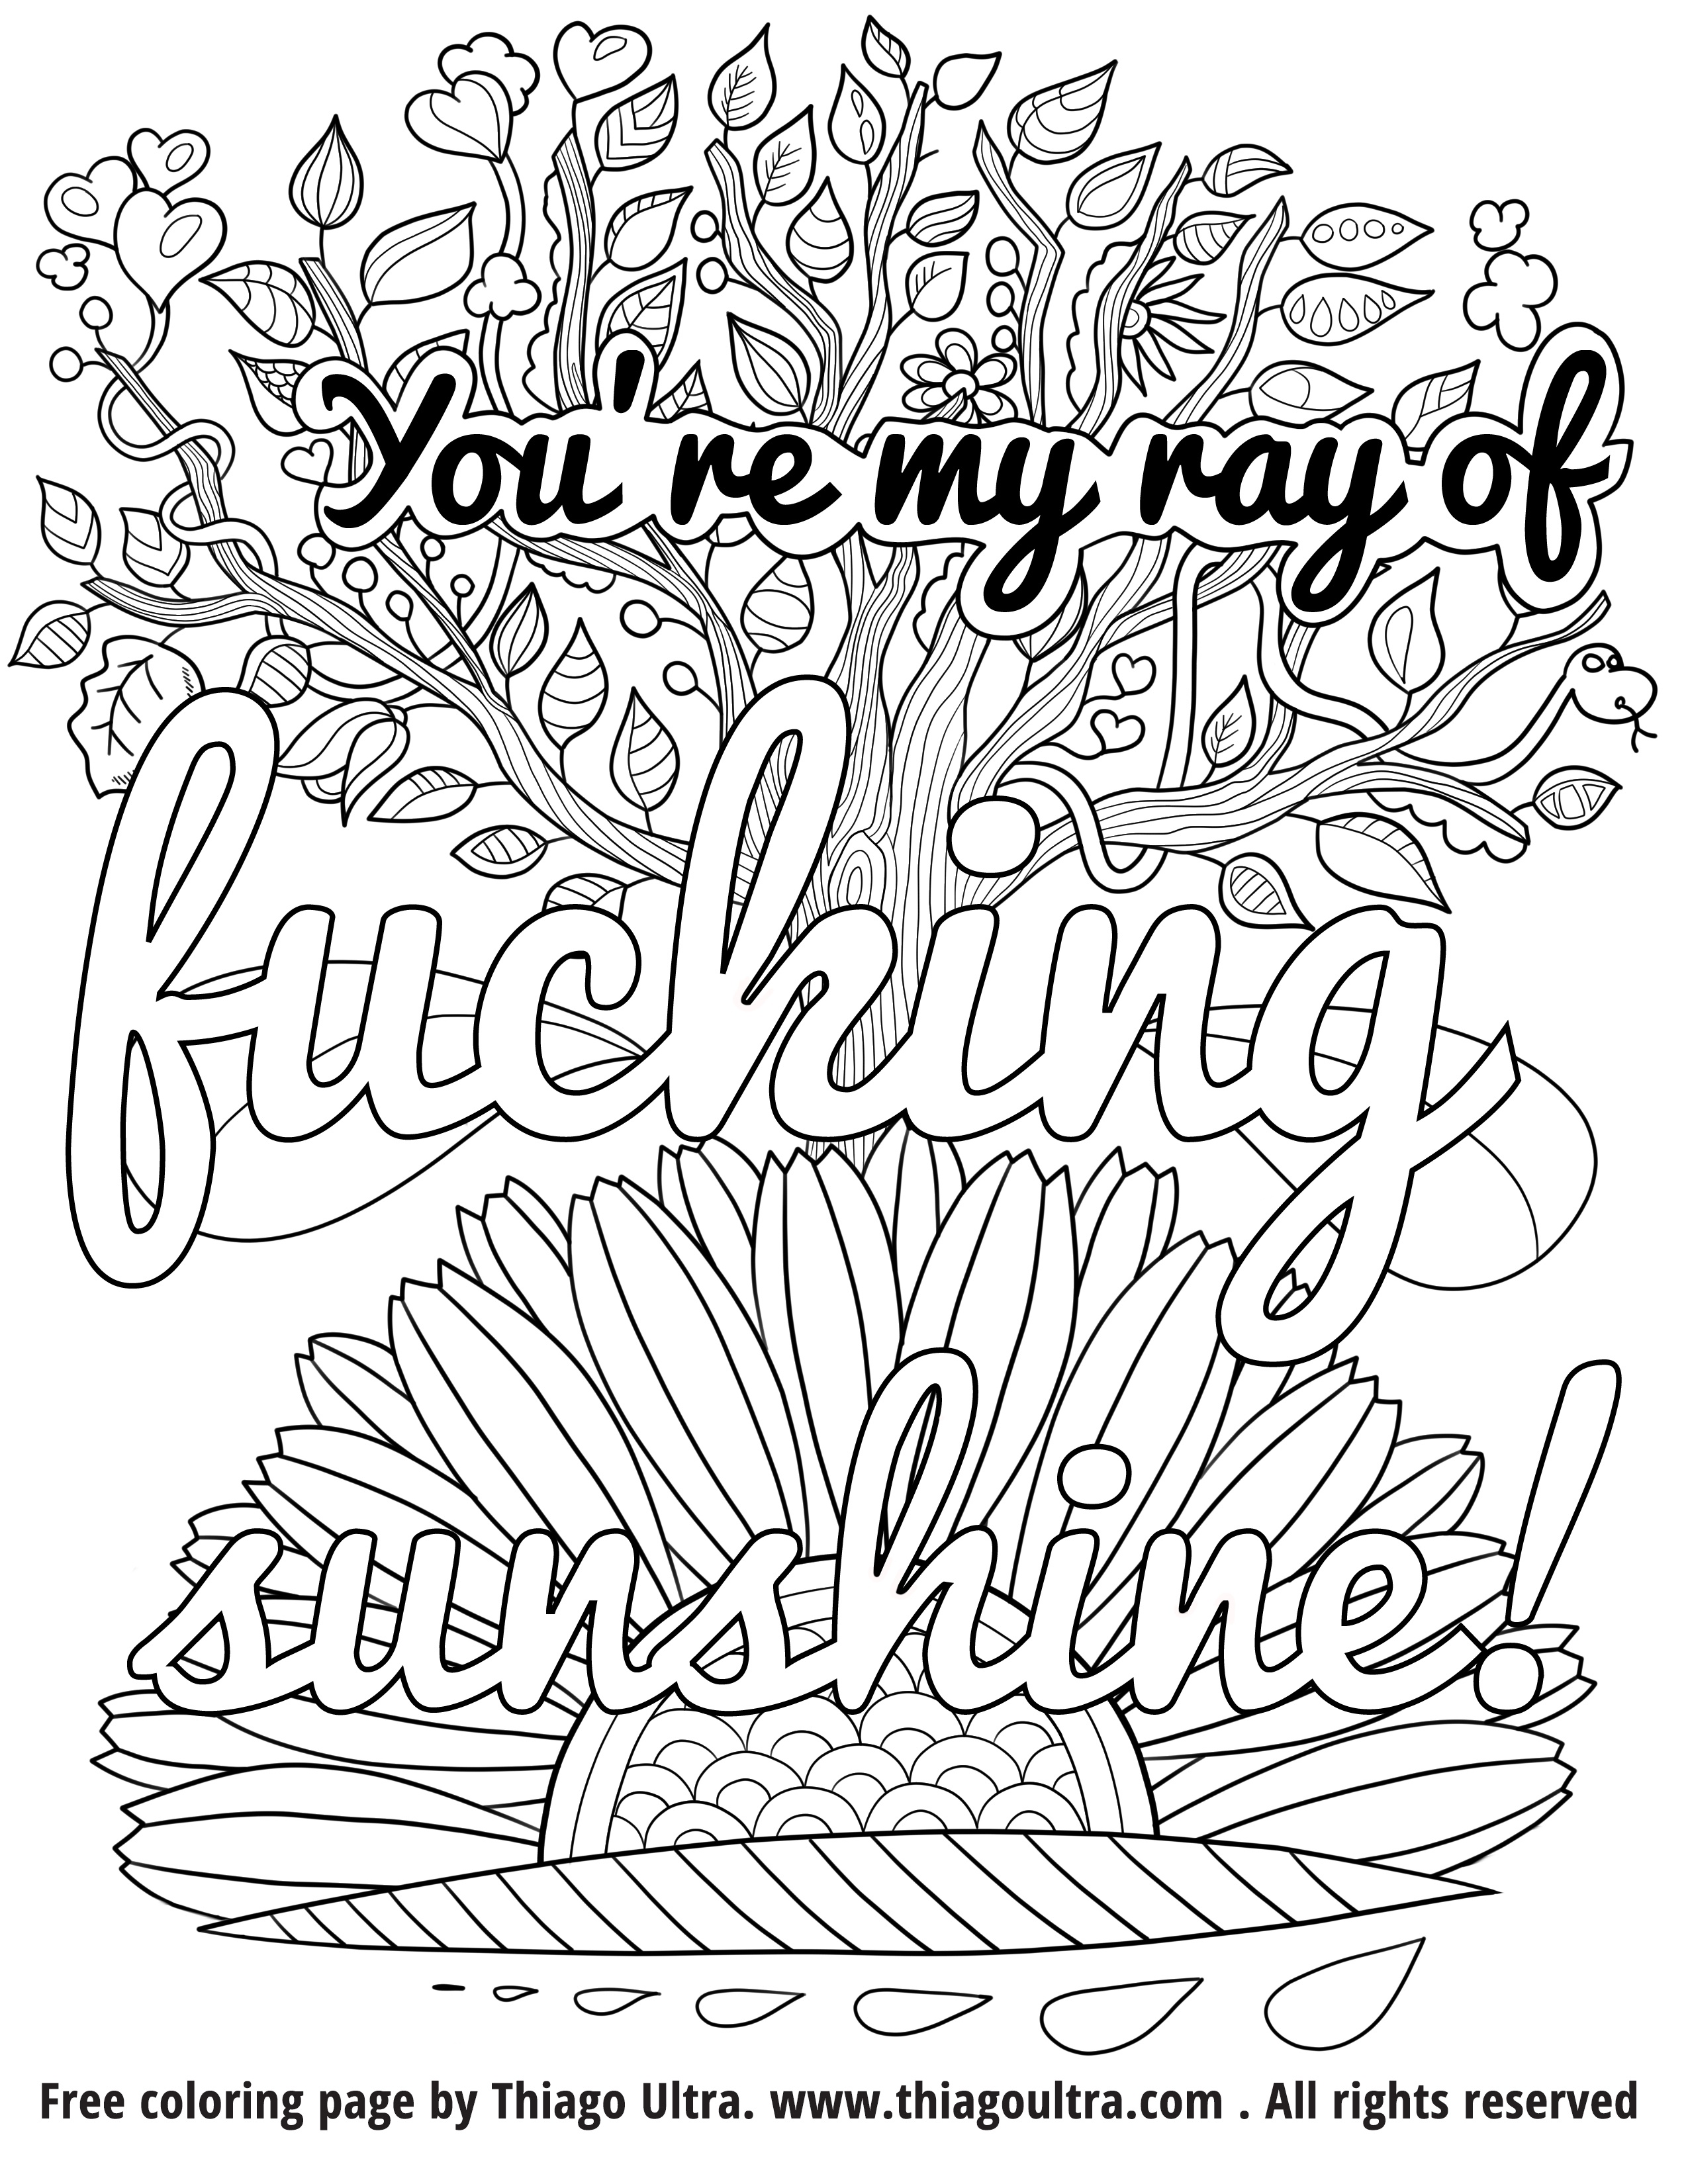 Coloring Ideas : 1840D37706A73E0C394A077851E5964E_Focus Free - Swear Word Coloring Pages Printable Free